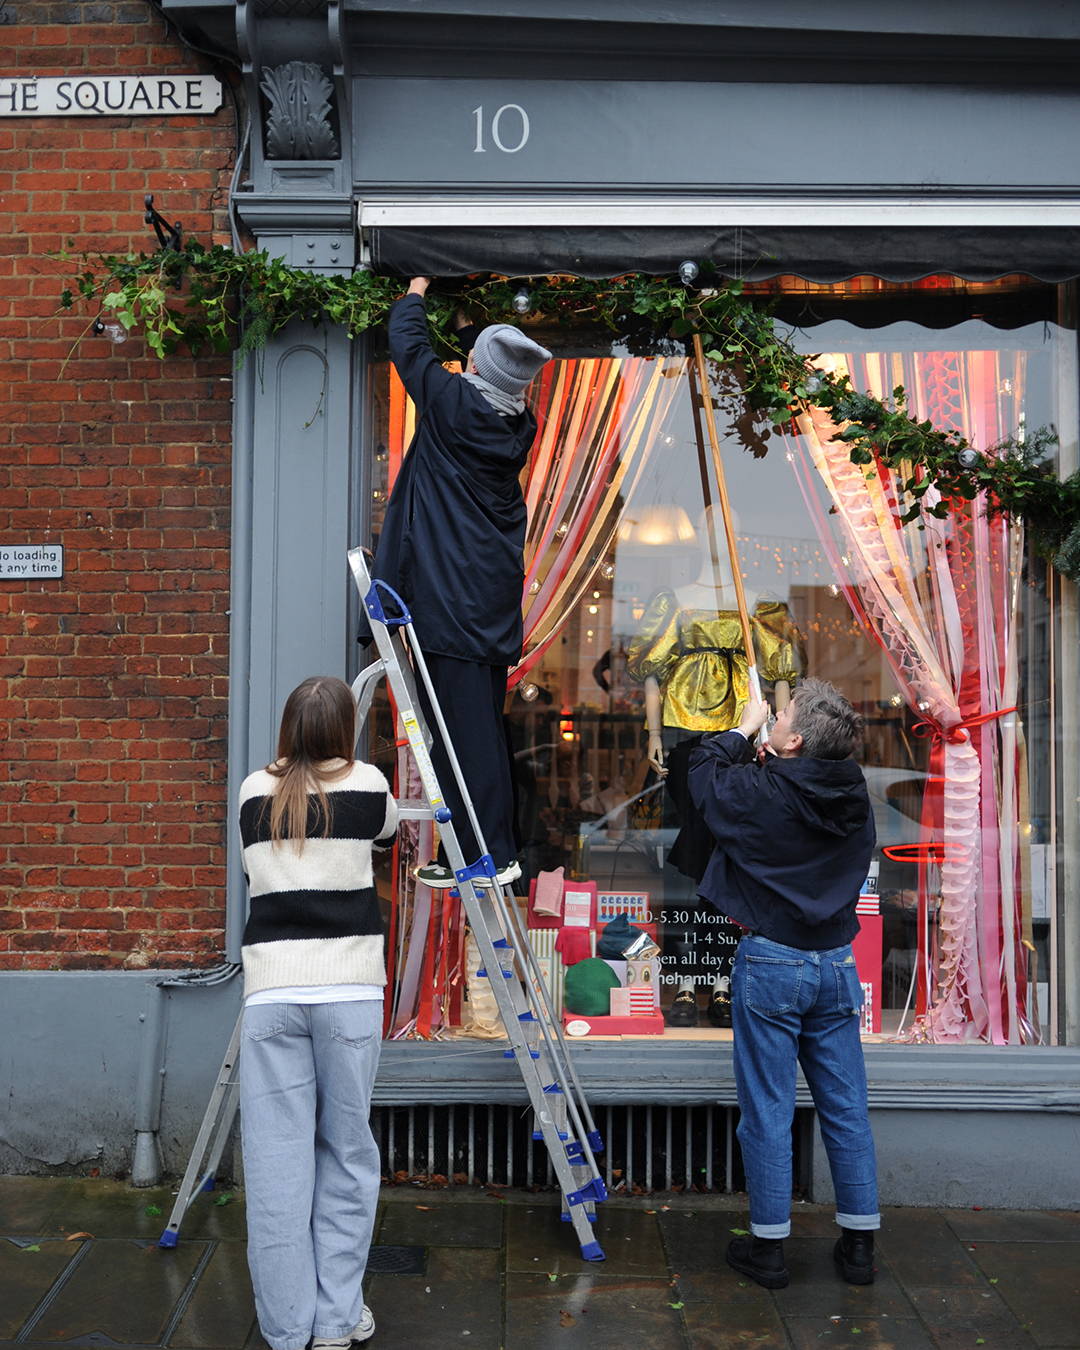 Poppy, Victoria and Katie putting up the annual christmas garland on the shop front.